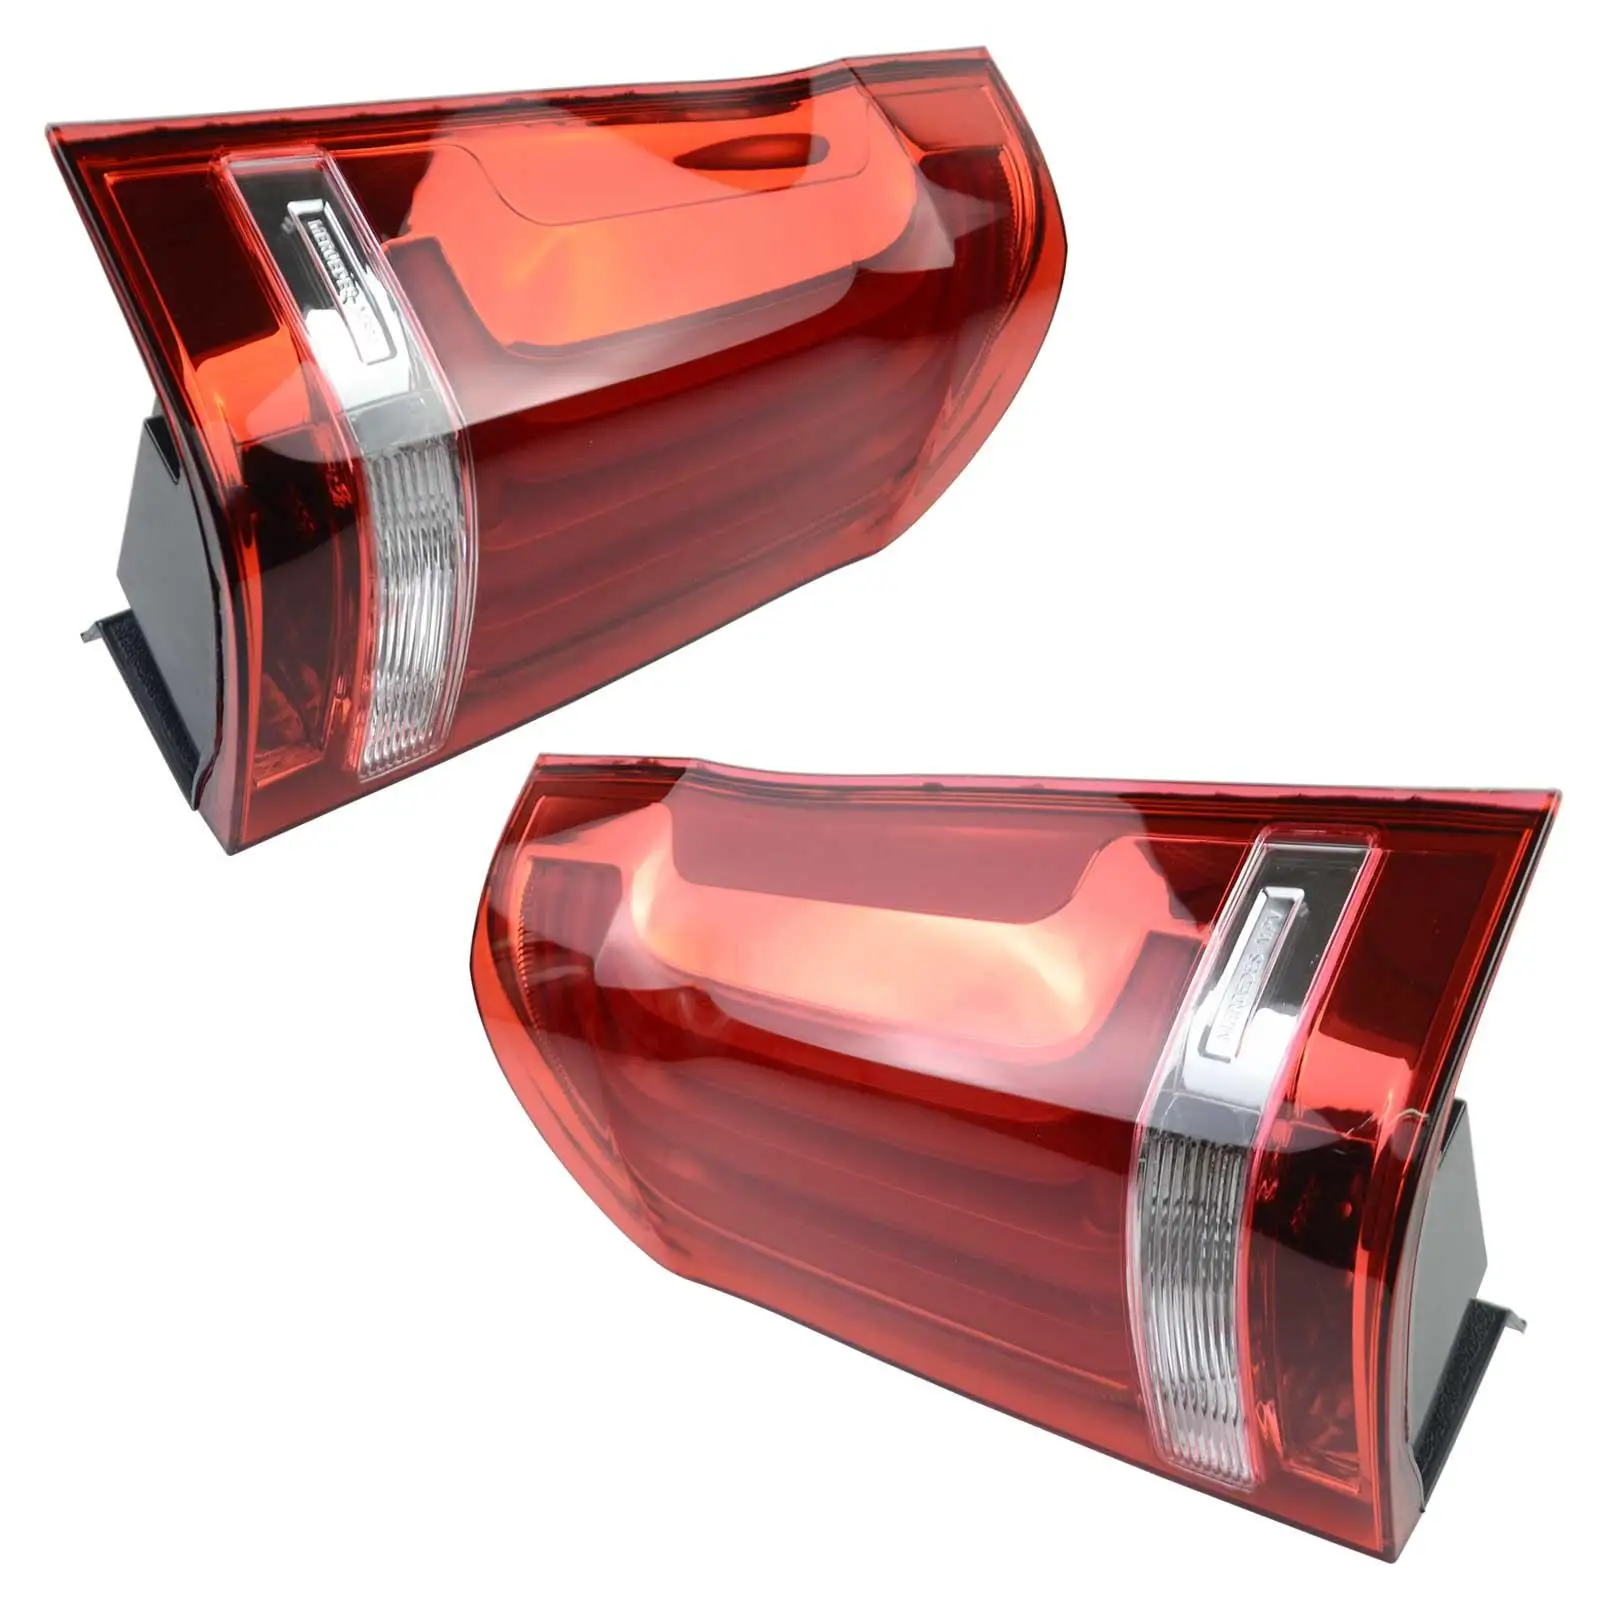 AP02 Tail Light Rear Light Left & Right For Mercedes-Benz W447 V-Class Vito A 447 820 06 64, A 447 820 05 64